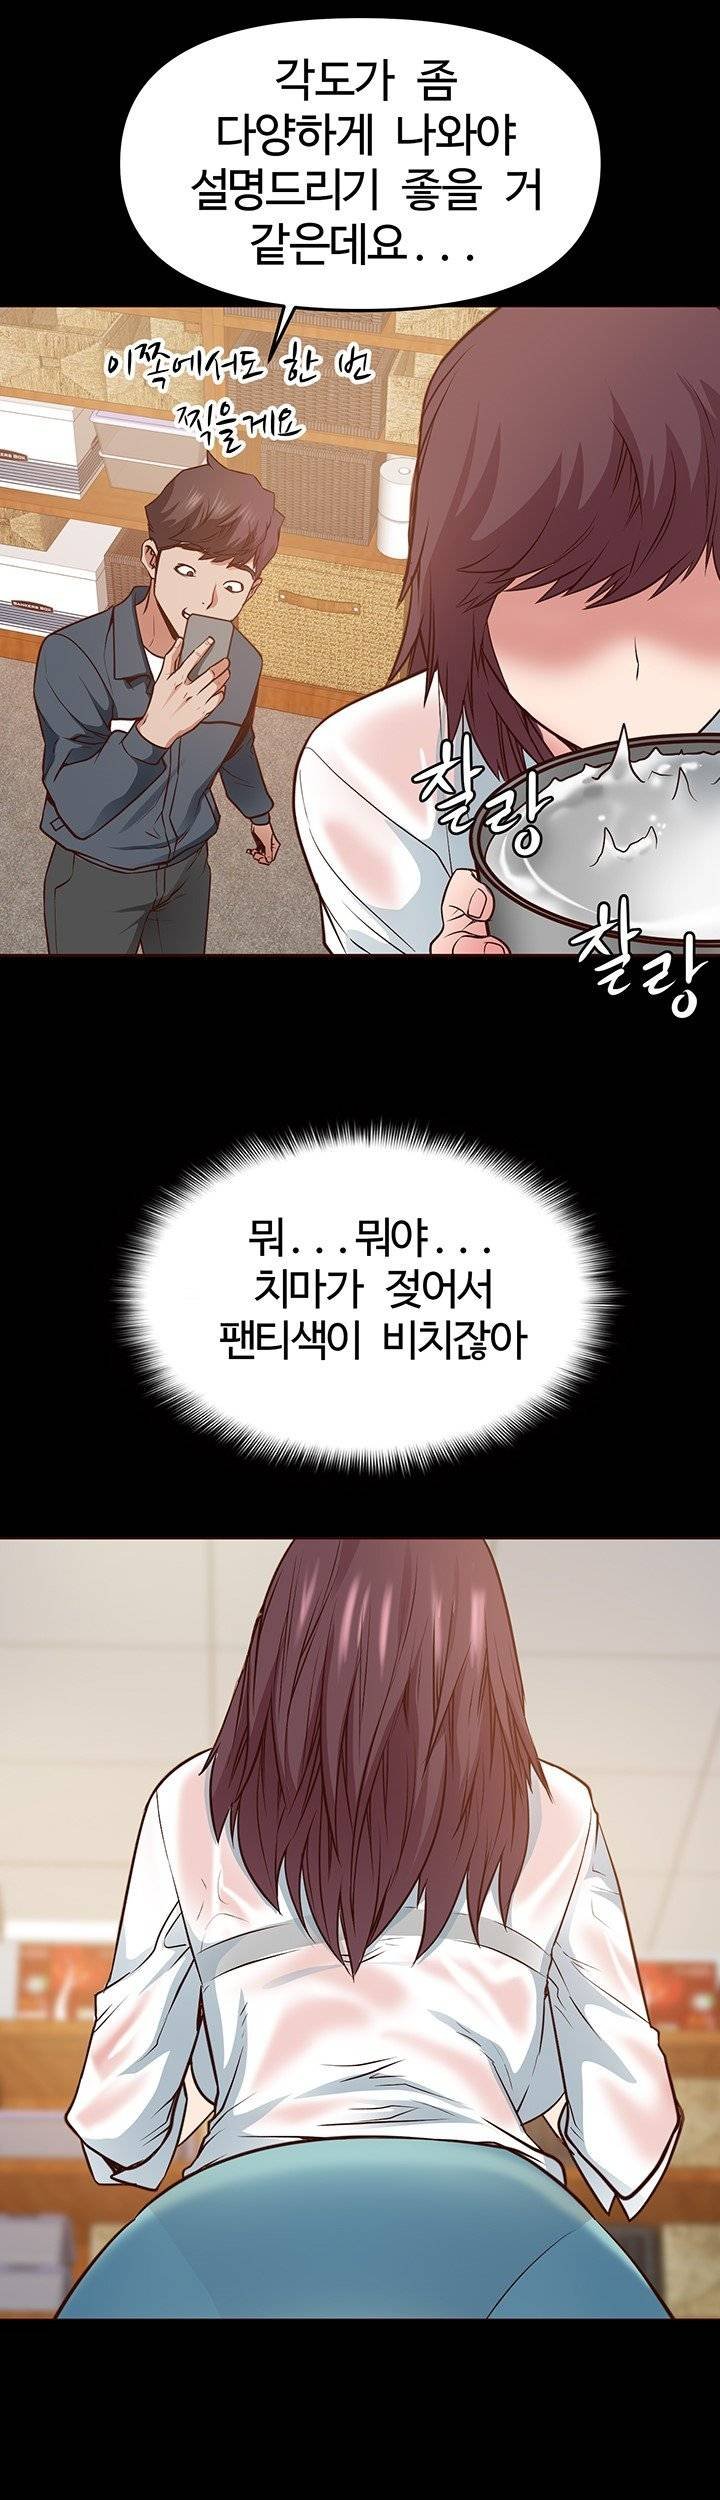 bs-anger-raw-chap-3-66